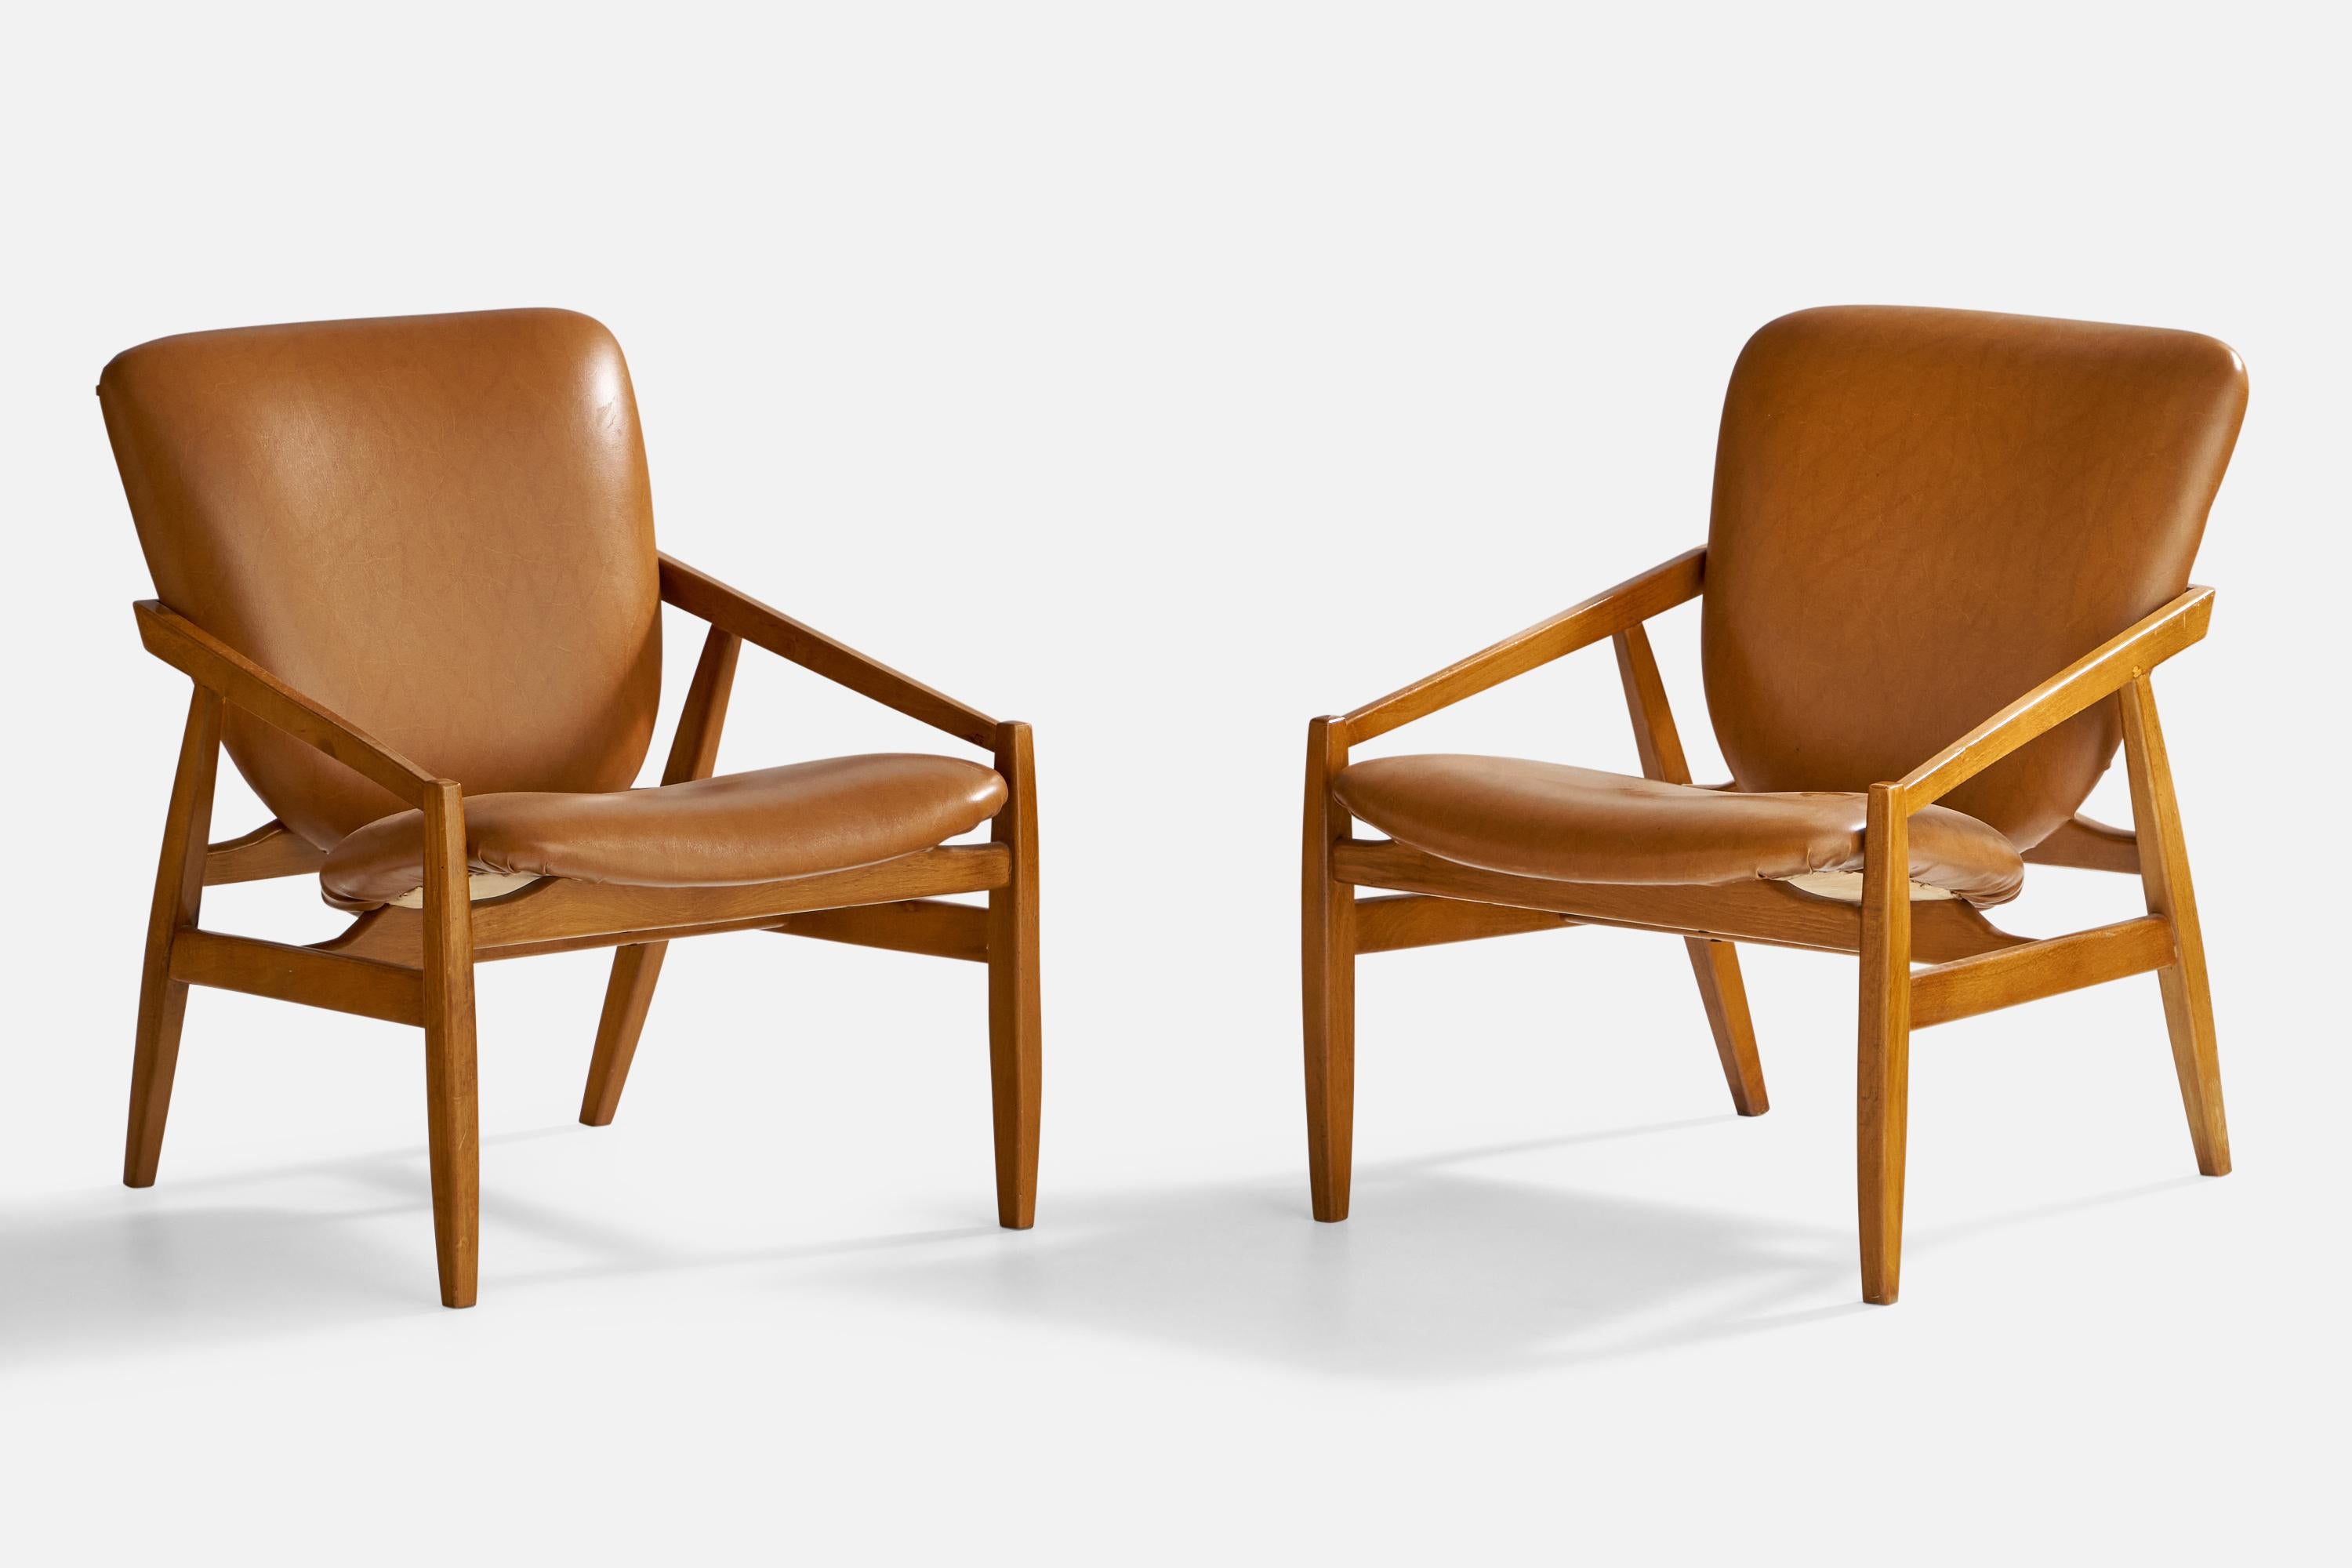 Mid-20th Century Italian Designer, Lounge Chairs, Walnut, Leatherette, Italy, 1950s For Sale